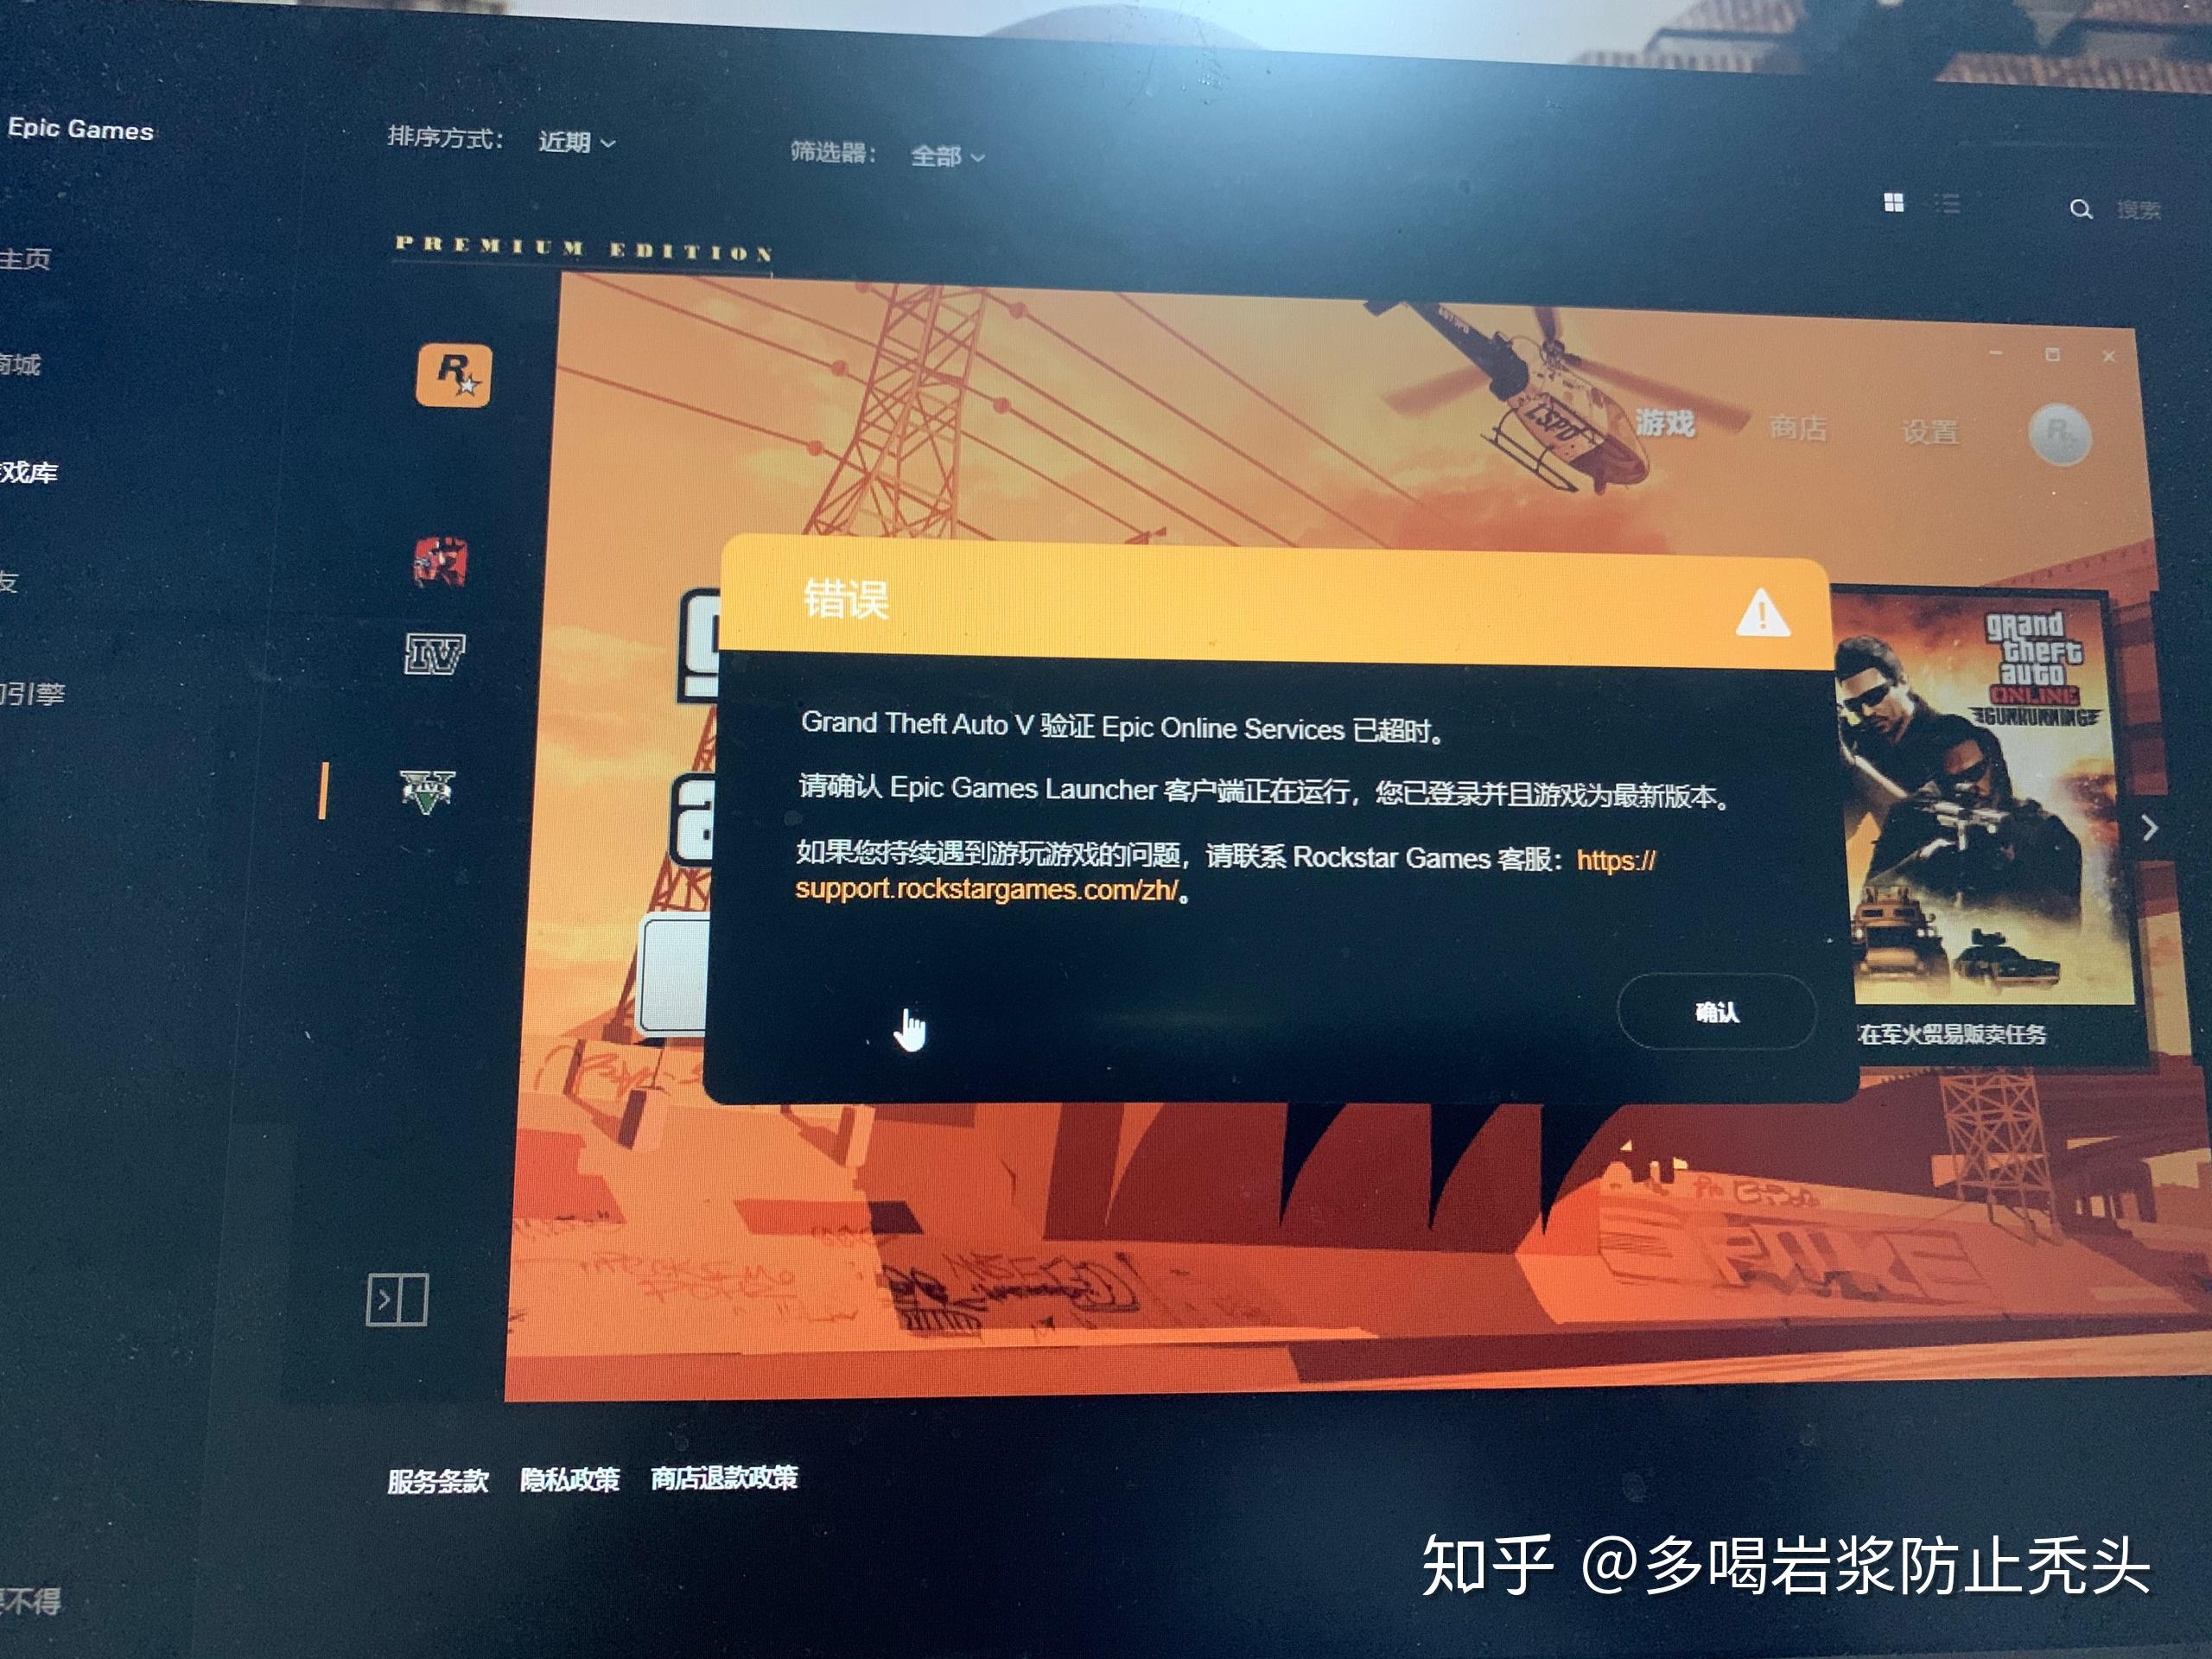 Grand Theft Auto V与epic online services进行身份验证已超时失败请验证epic games ...